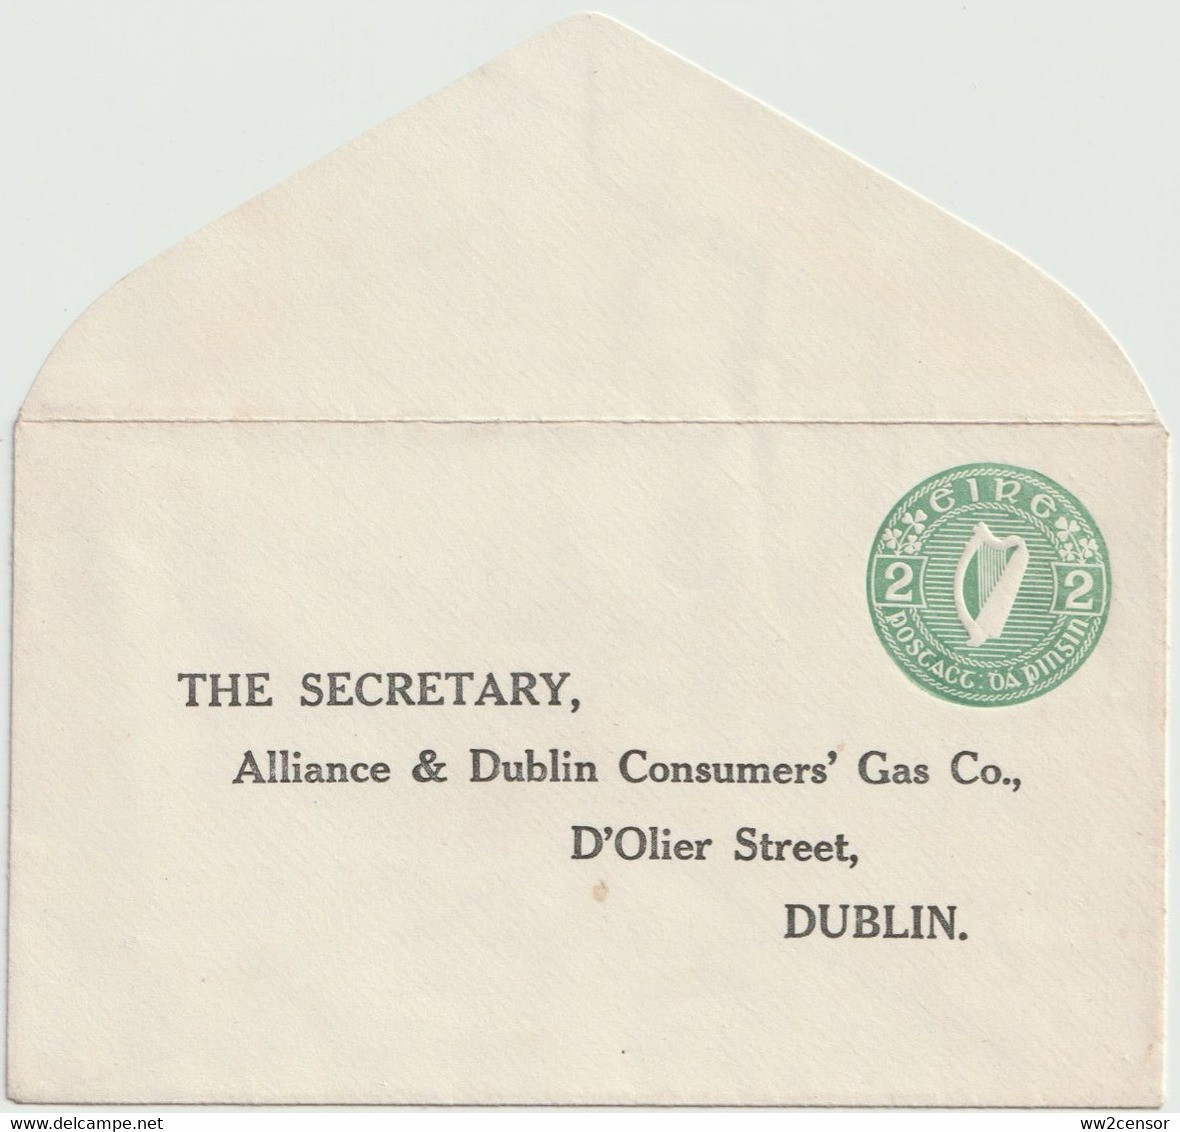 Ireland Irland Alliance & Dublin Consumers' Gas Co. Stamped To Order Postal Stationery 2d Envelope High Catalogue Value - Enteros Postales